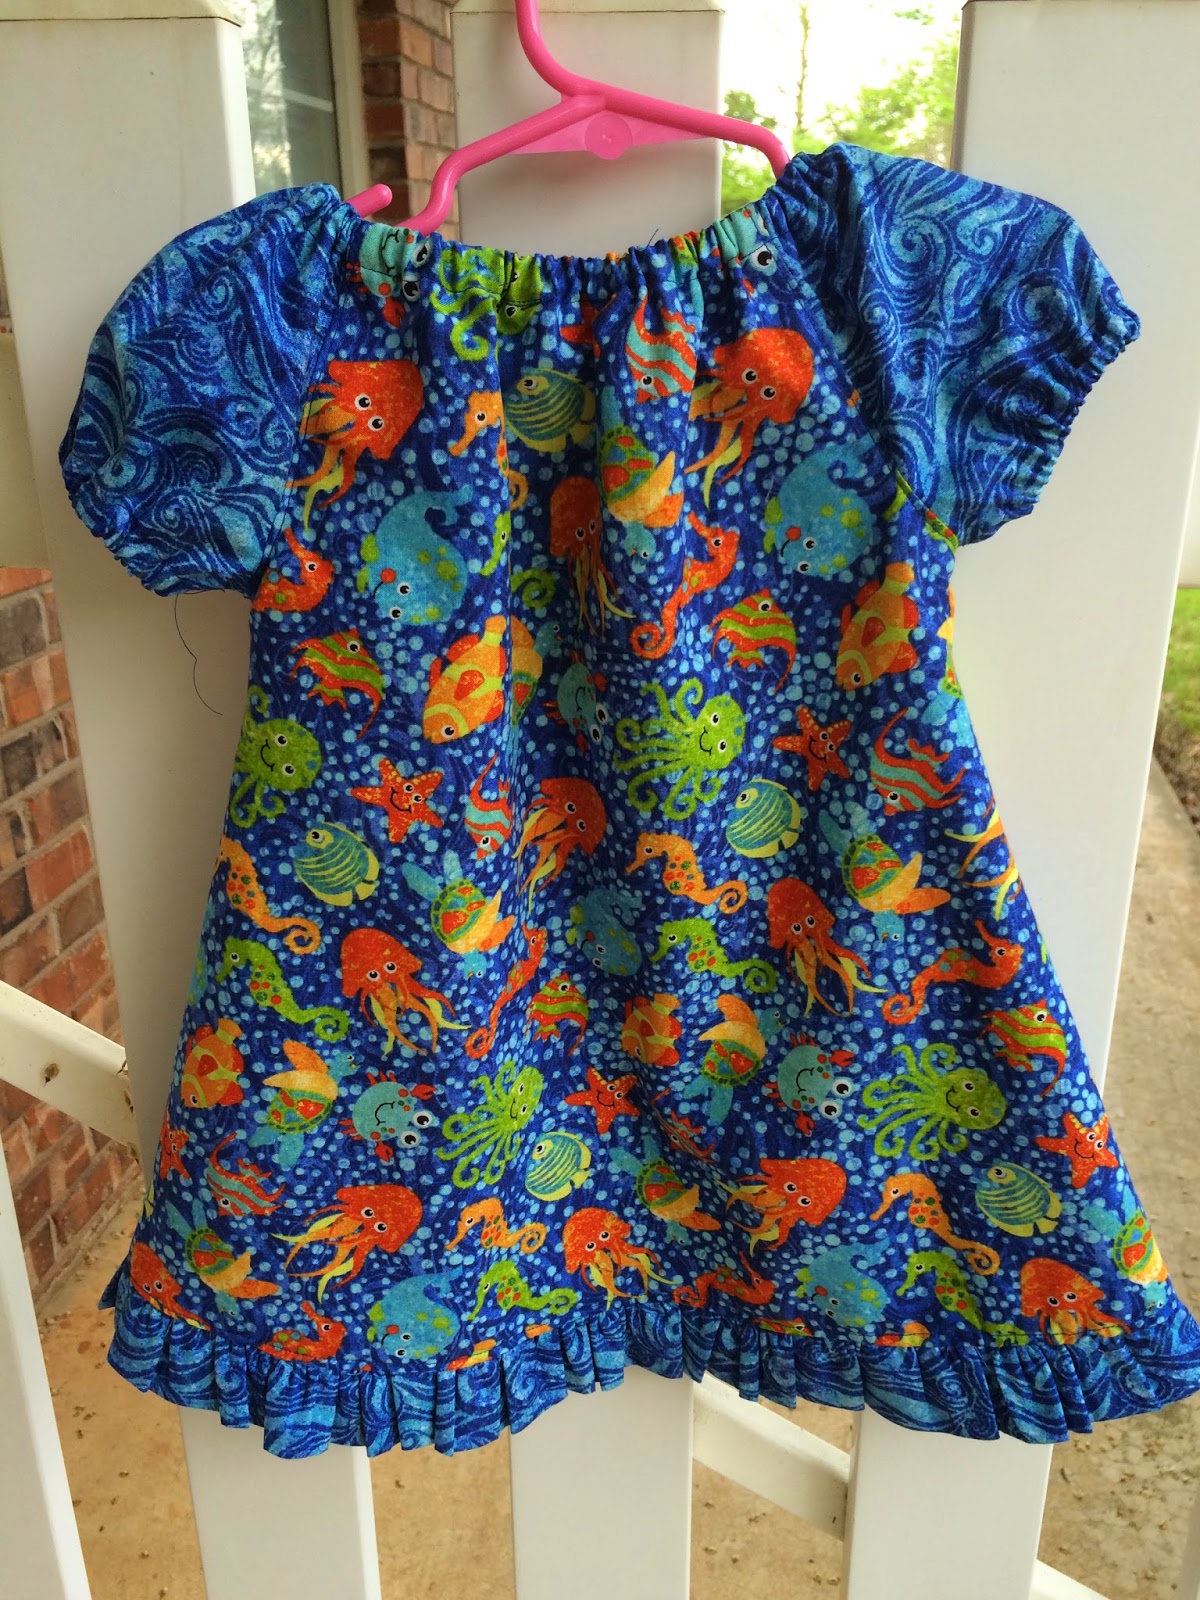 Robin Loves Quilting: How (not) to sew a dress expediently